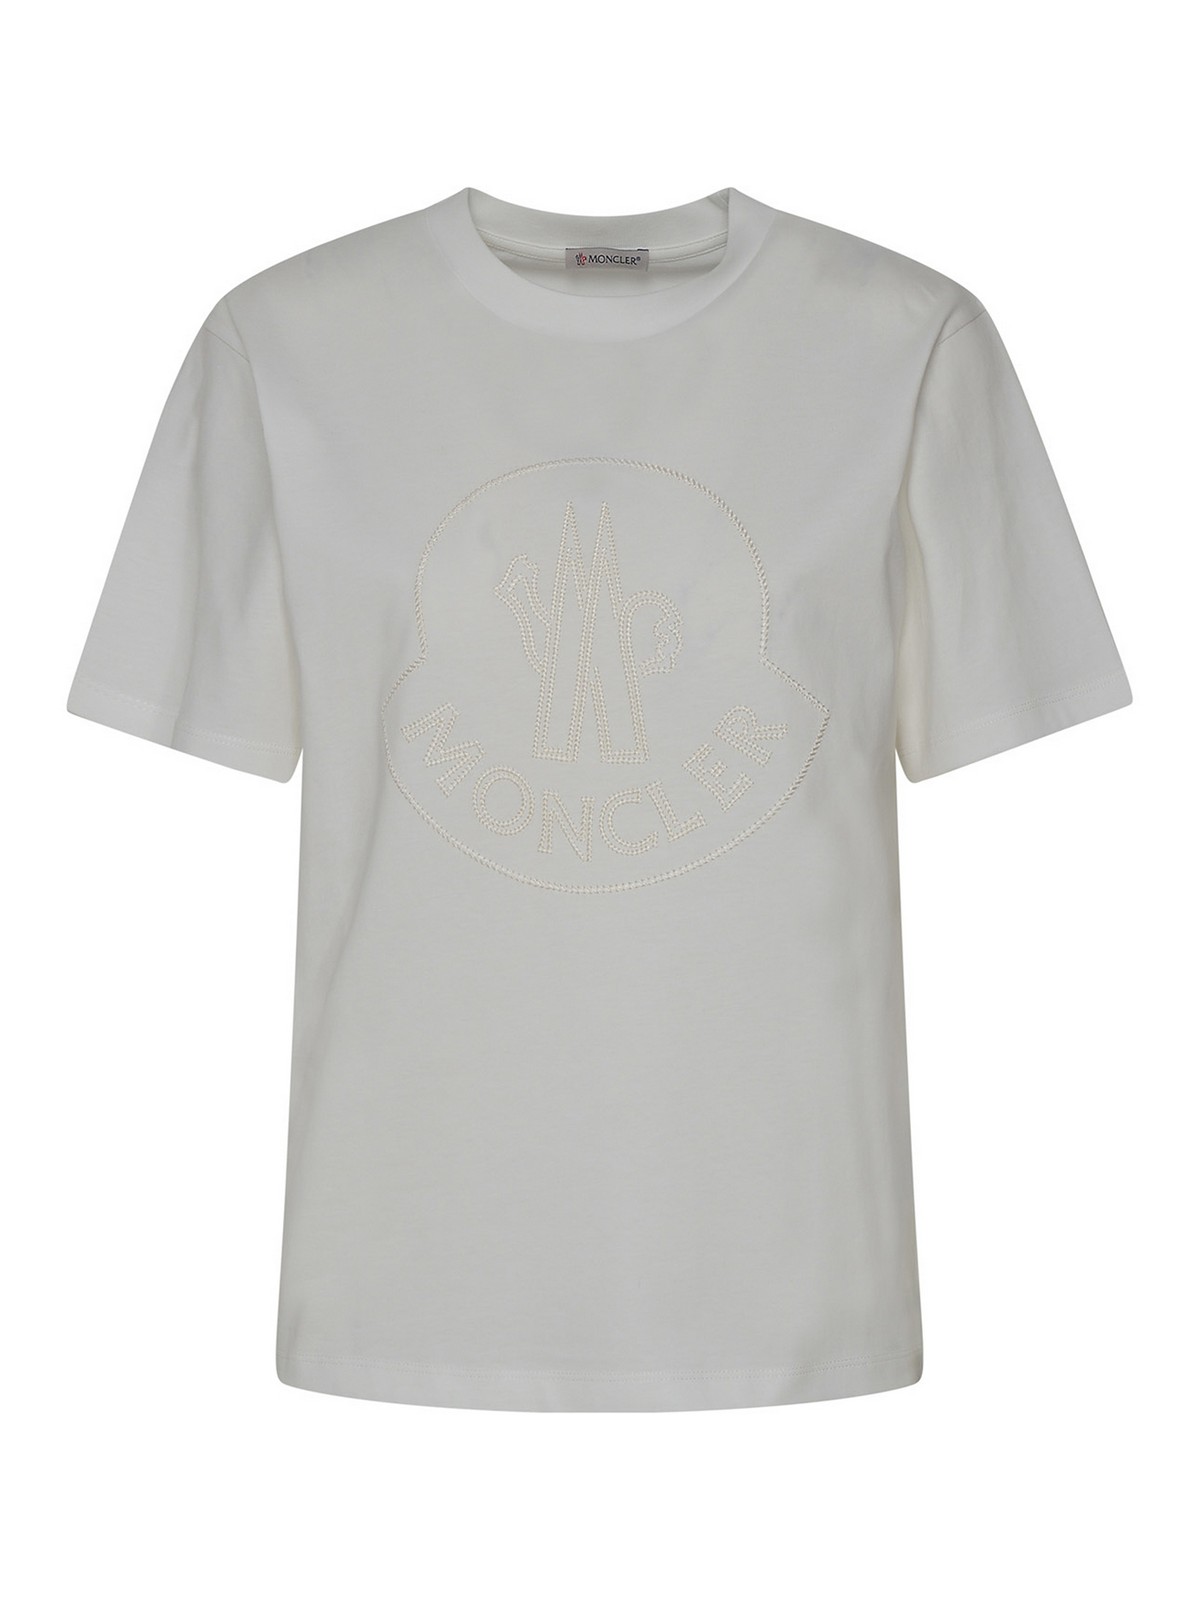 Moncler - T-shirt for Woman - White - 8C00014829HP-033